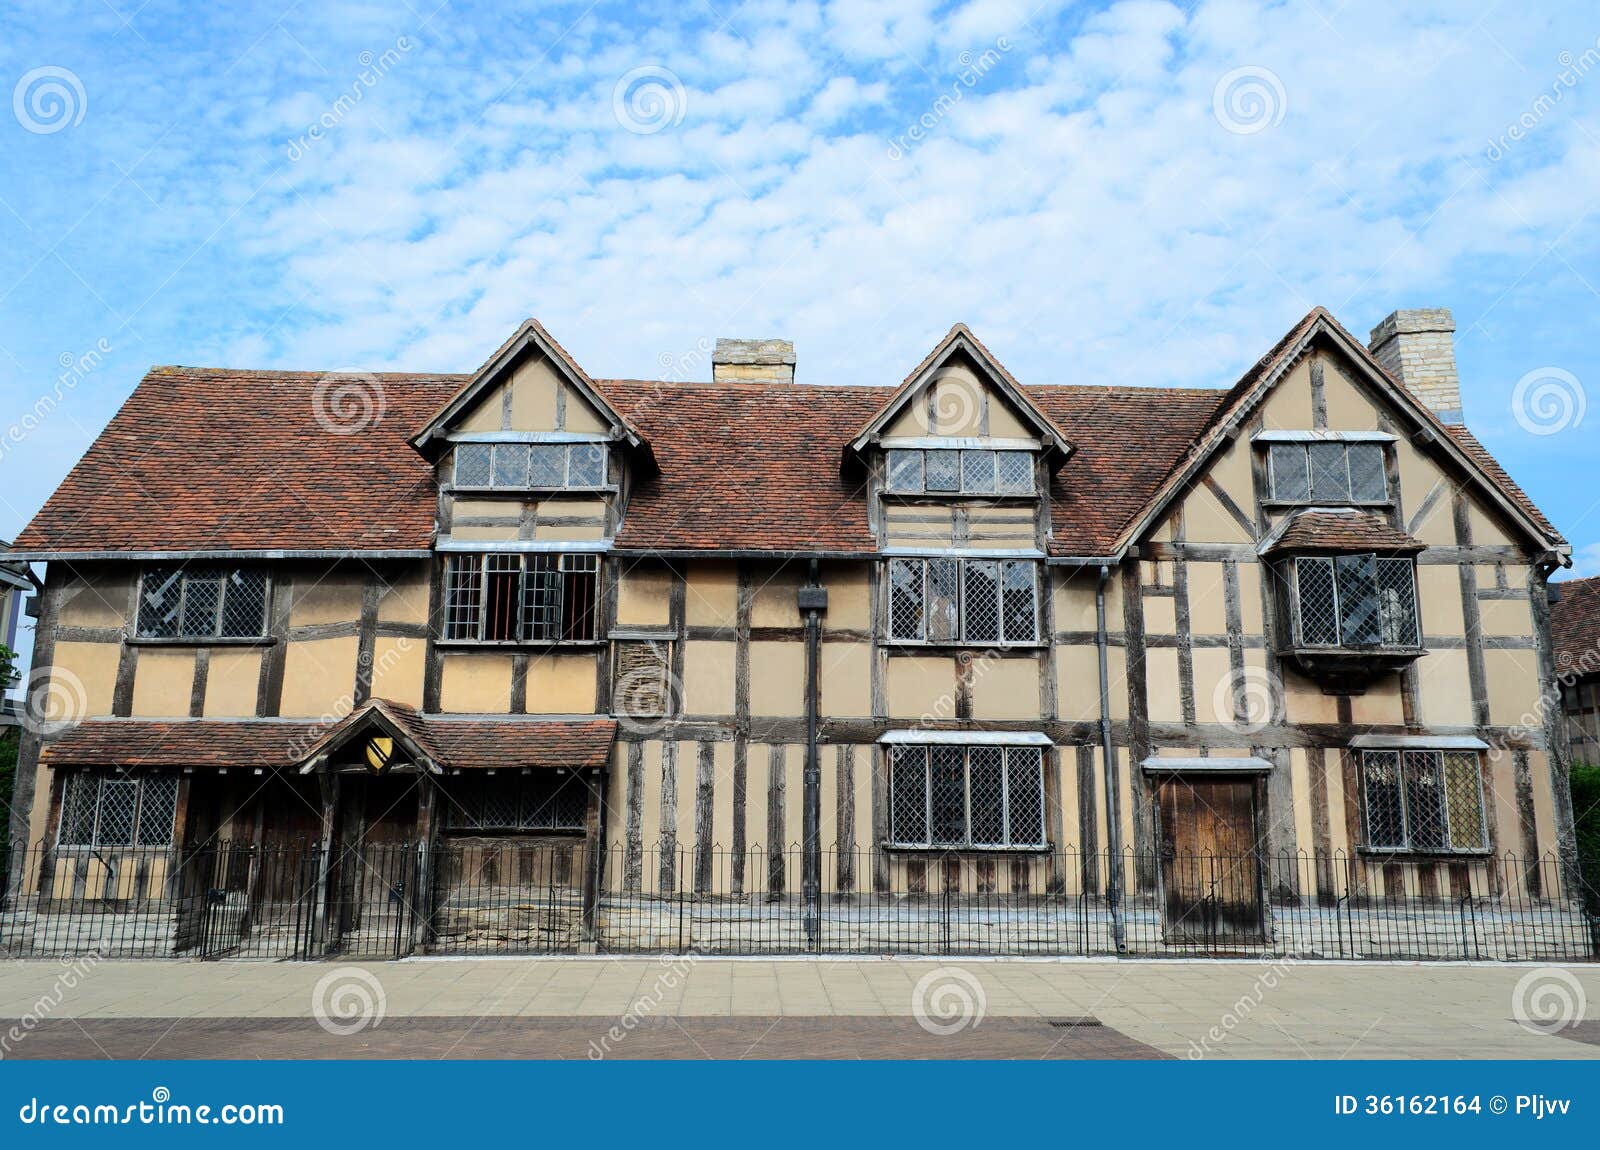 birthplace of shakespeare